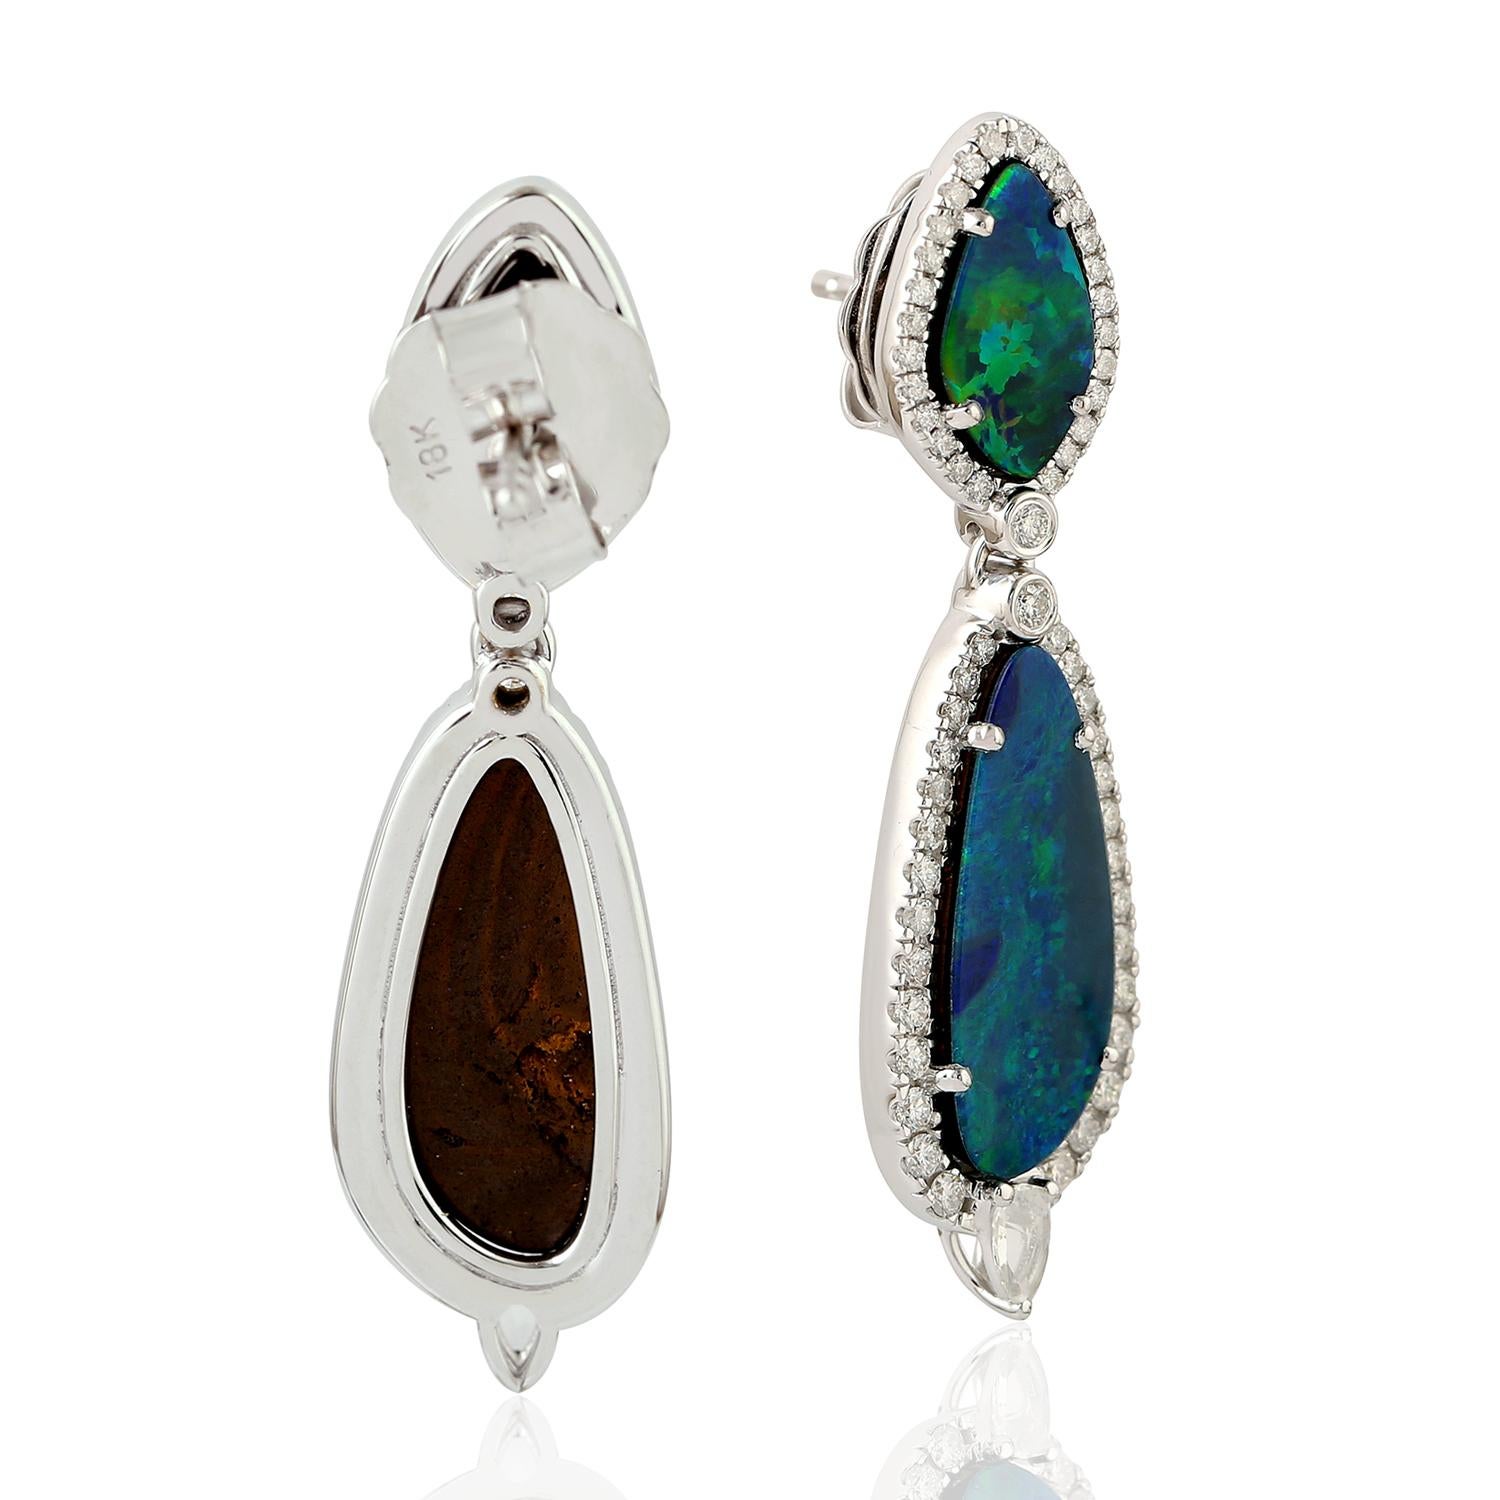 Contemporary 7.38 ct Opal Dangle Earrings With Diamonds Made In 18k White Gold For Sale